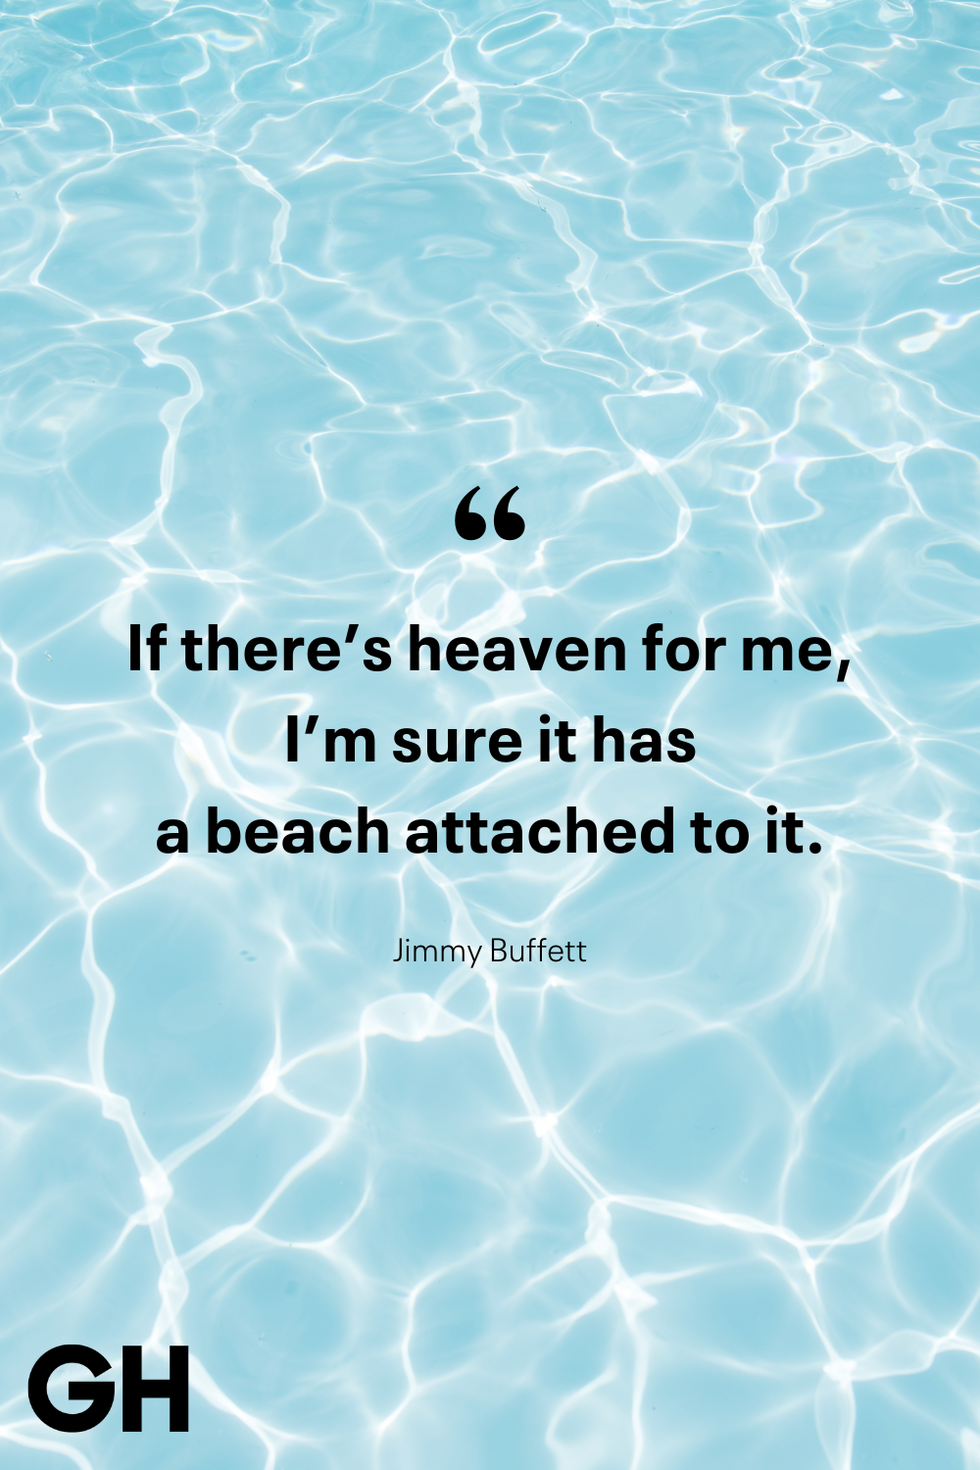 if there’s heaven for me, i’m sure it has a beach attached to it — jimmy buffett